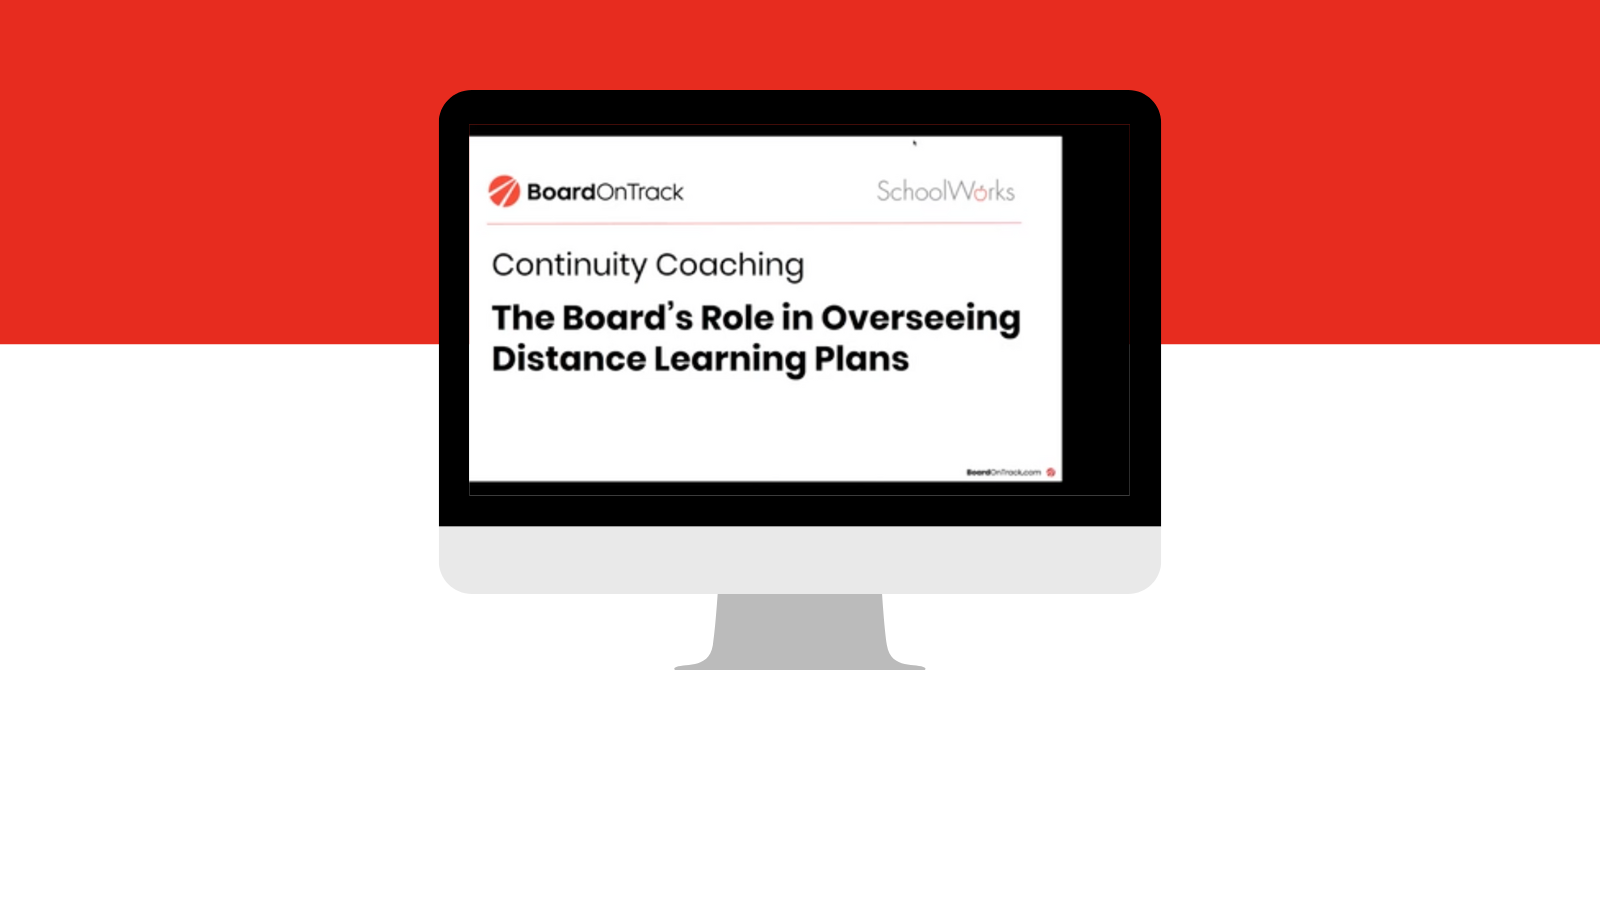 The Board's Role in Overseeing Distance Learning Plans